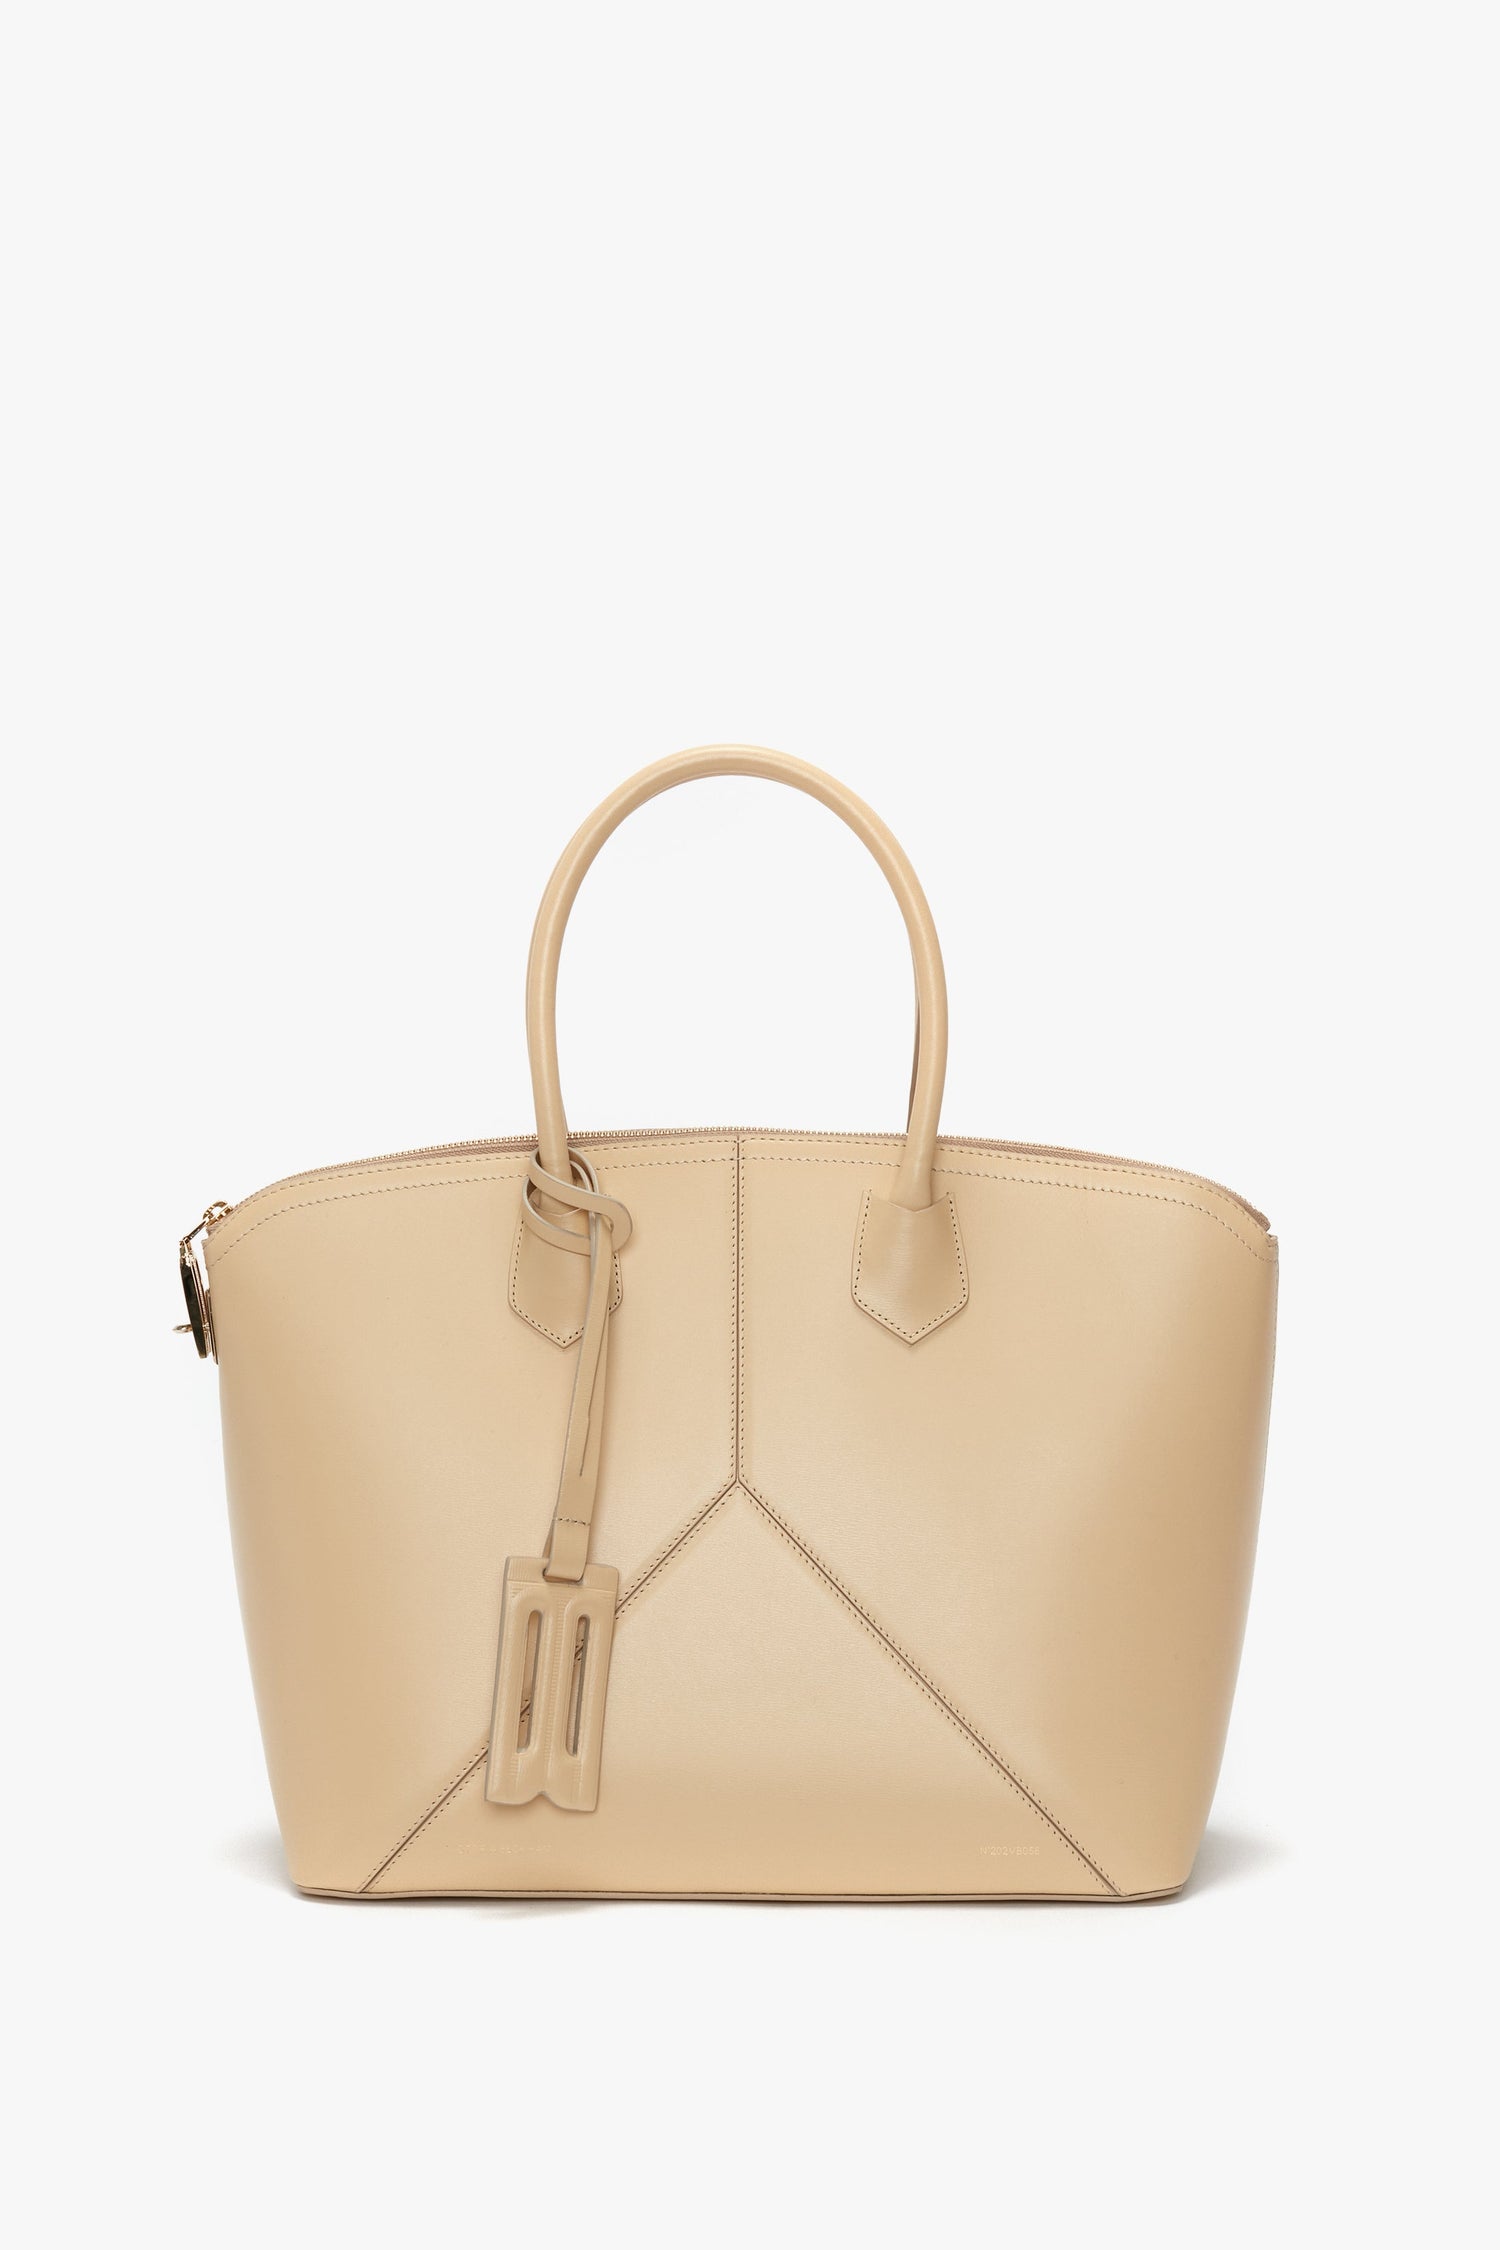 Victoria Beckham Victoria Bag In Sesame Leather: Beige leather handbag with dual handles and minimalist stitching, featuring a small attached tag and sleek leather panels.